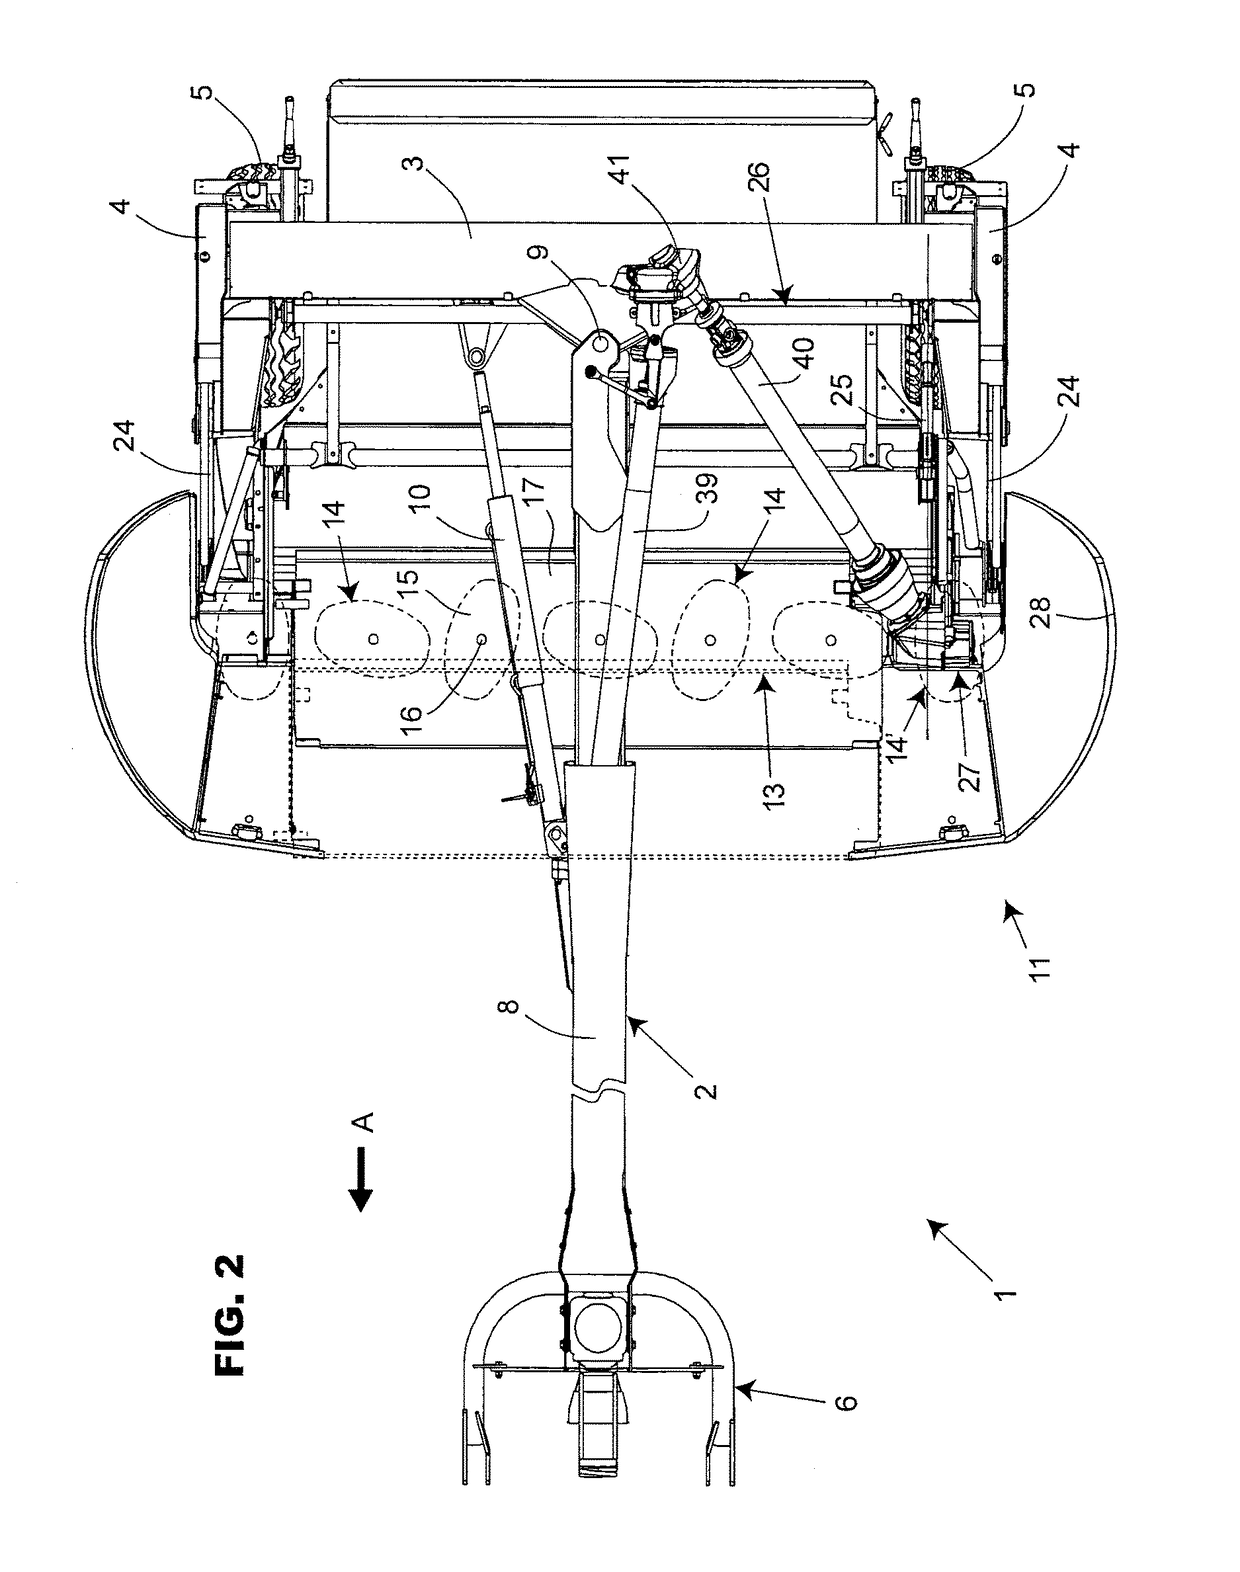 Harvesting machine comprising an improved lubrication device